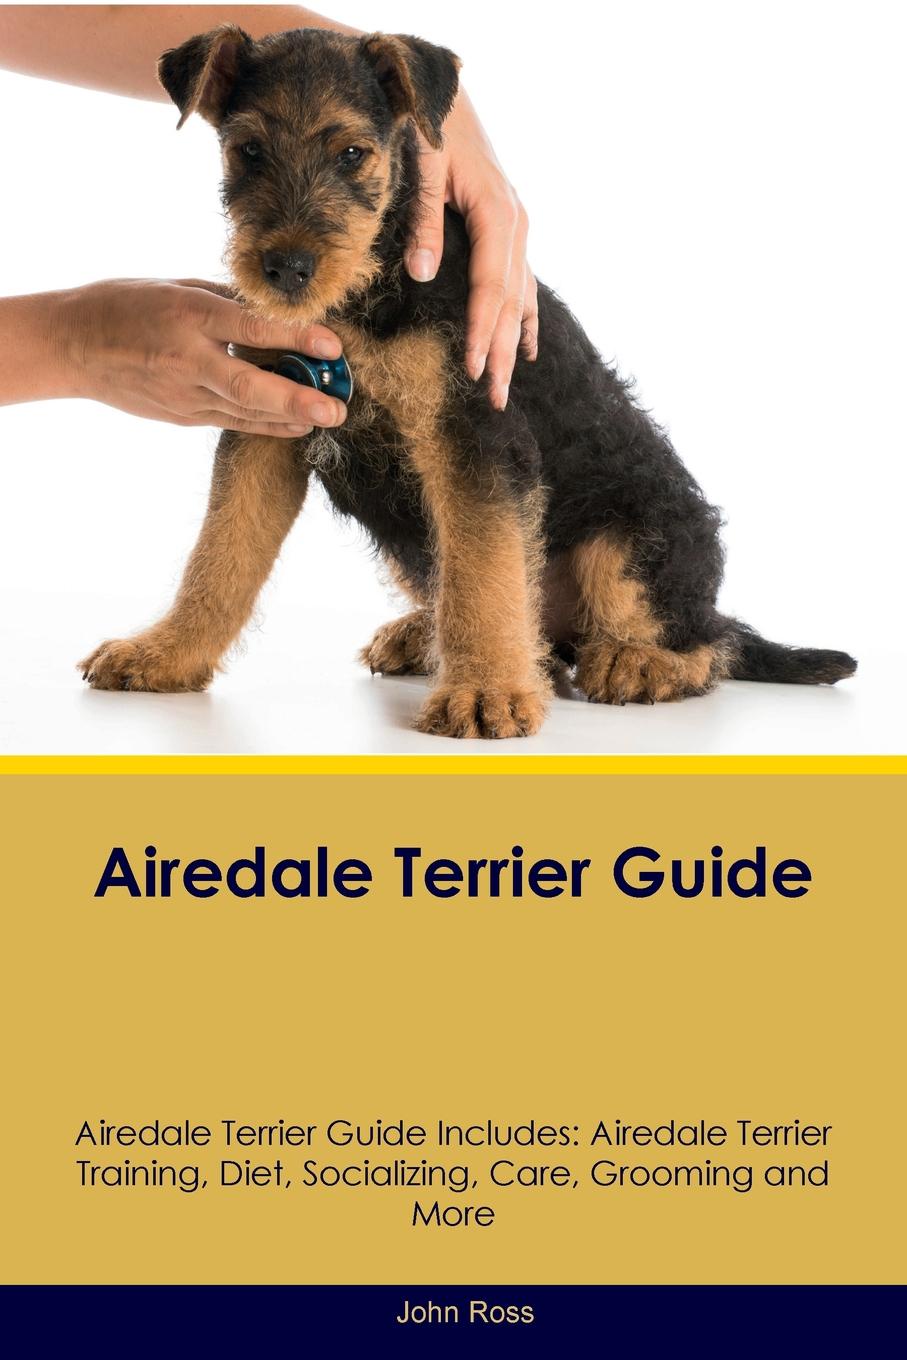 Airedale Terrier Guide Airedale Terrier Guide Includes. Airedale Terrier Training, Diet, Socializing, Care, Grooming, Breeding and More